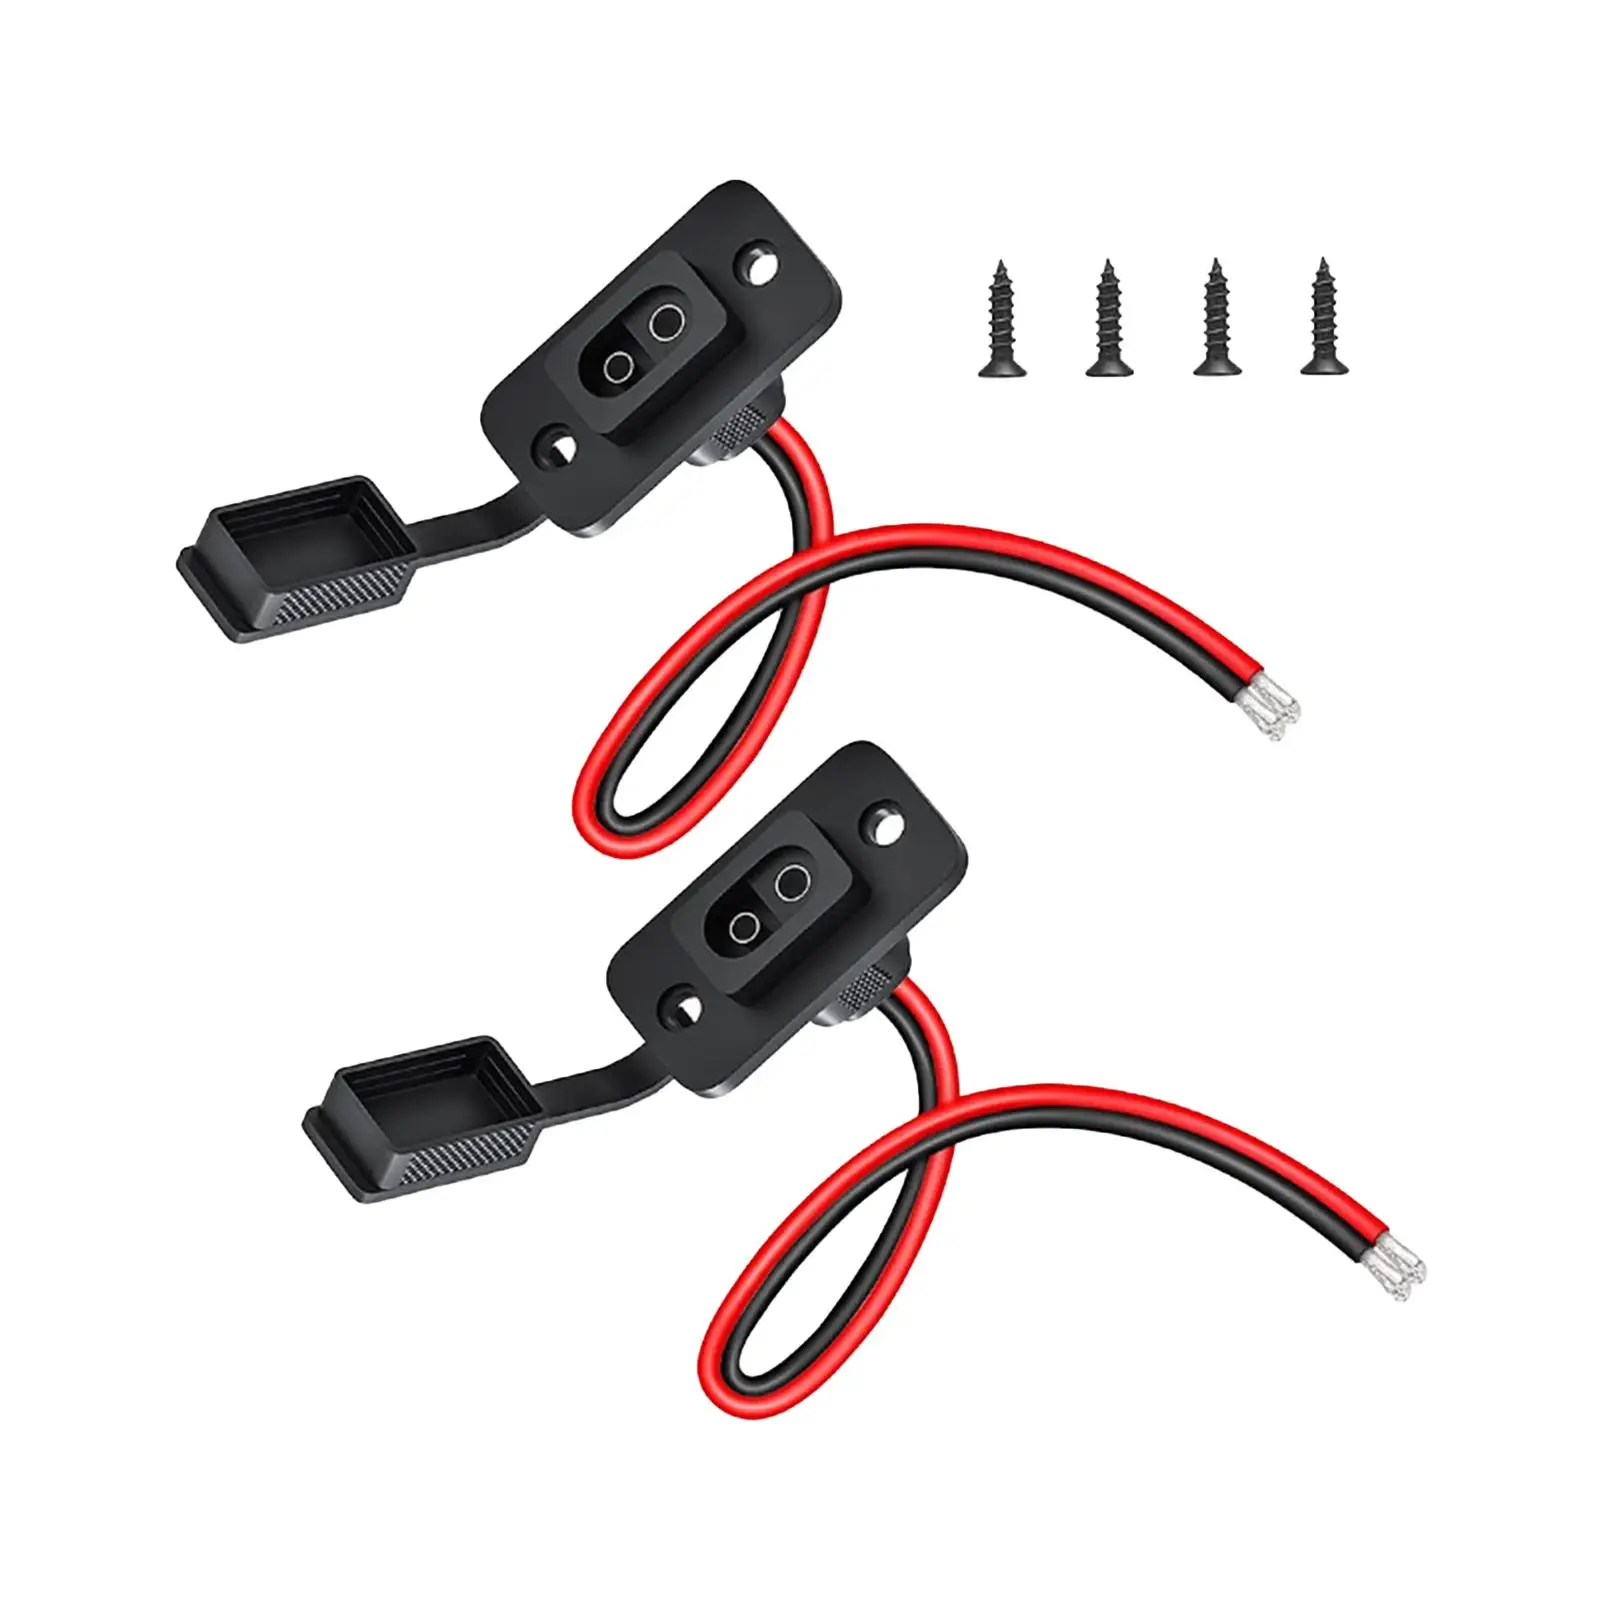 2x SAE Socket Flush-mountable Heavy Duty Boats RV Male Plug to Female Socket Cable Quick Connect Disconnect SAE Extension Cable